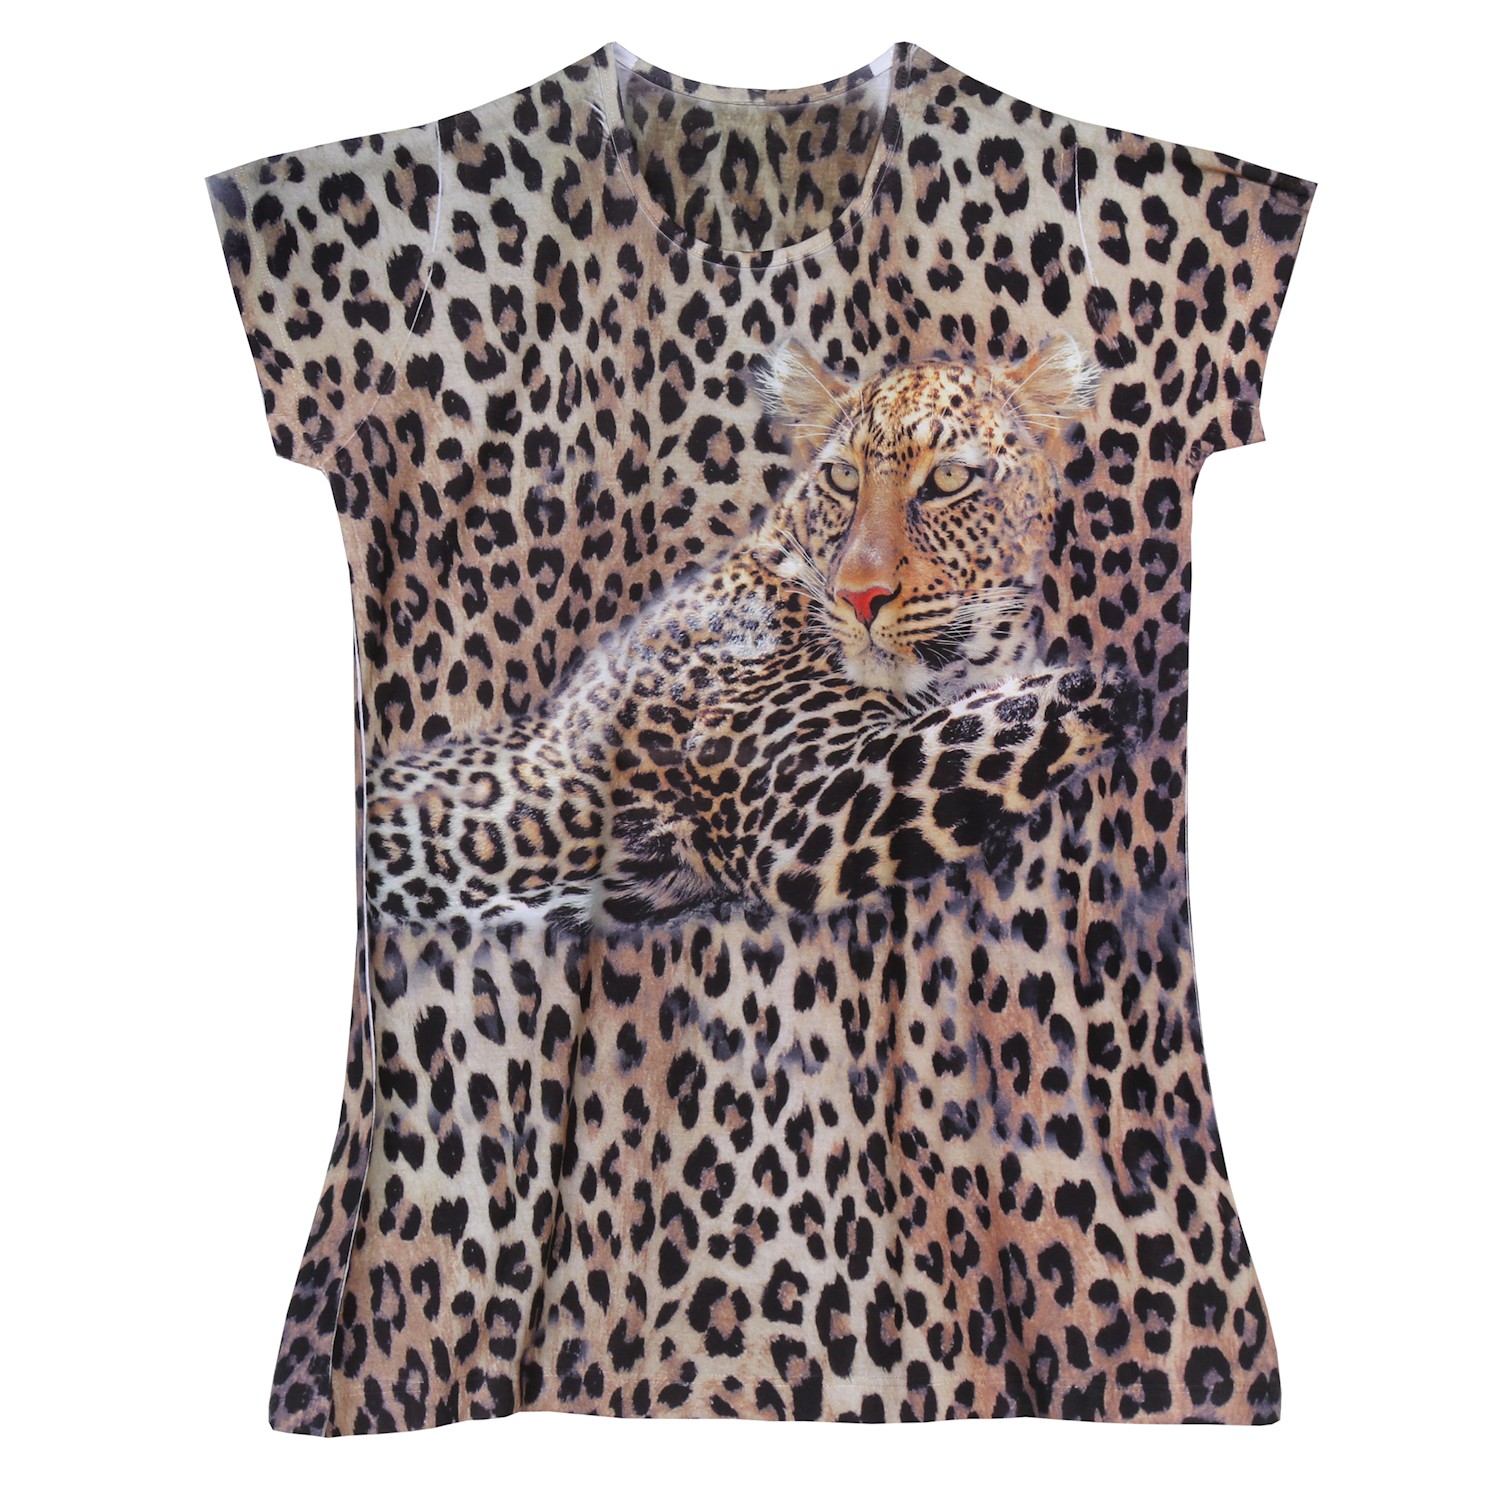 What On Earth Women's Leopard T-Shirt Top - Animal Print Tee with Cap